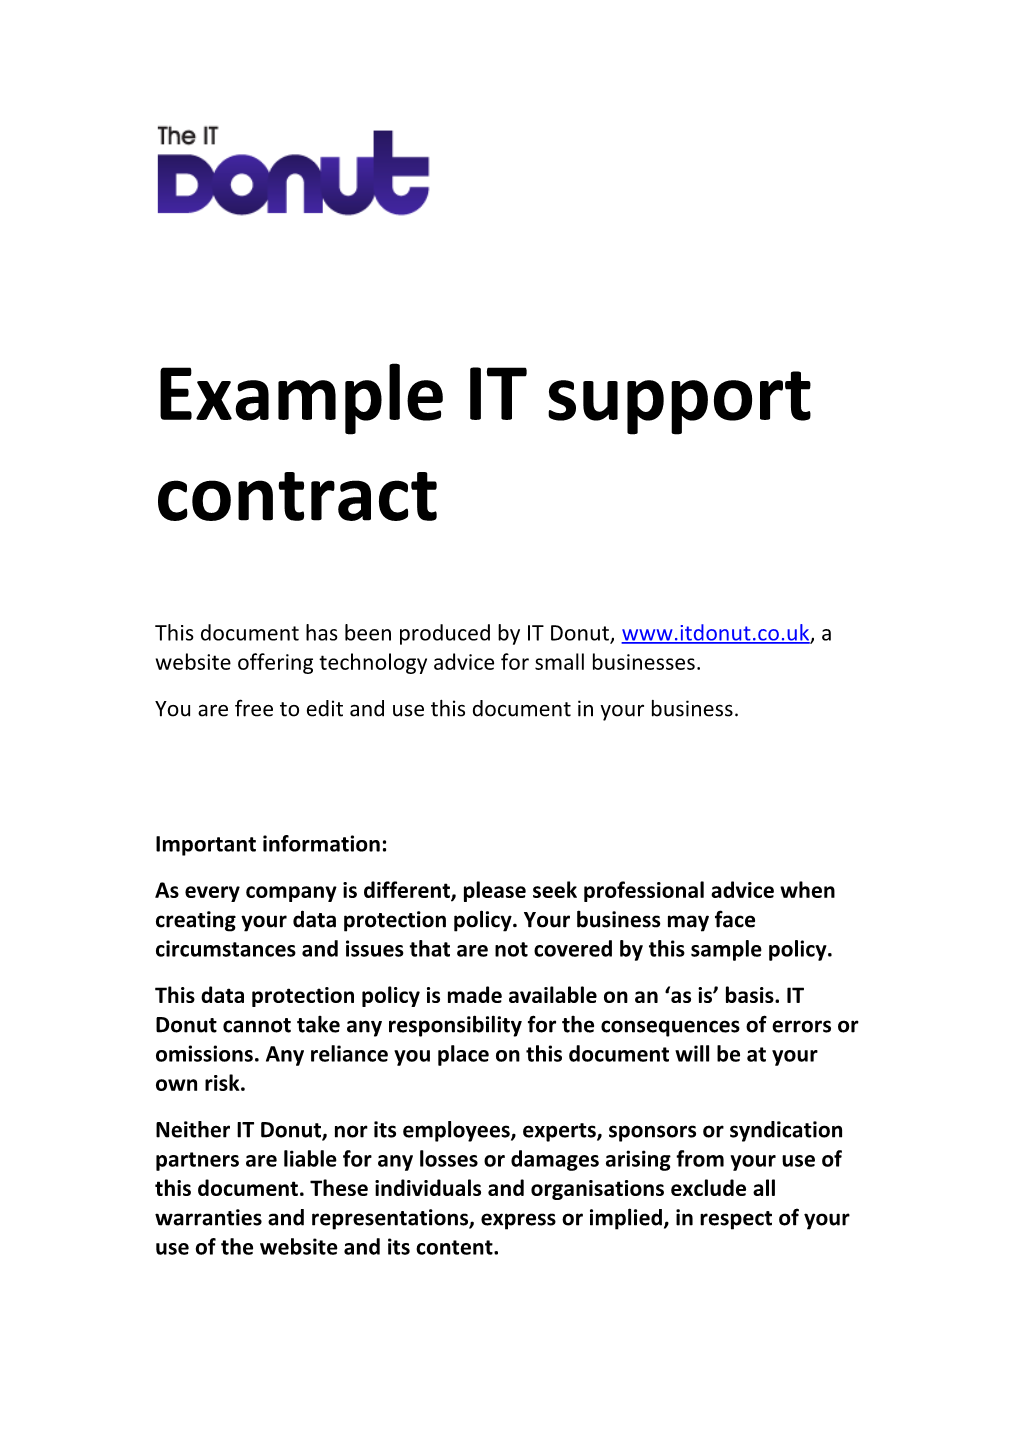 Example IT Support Contract